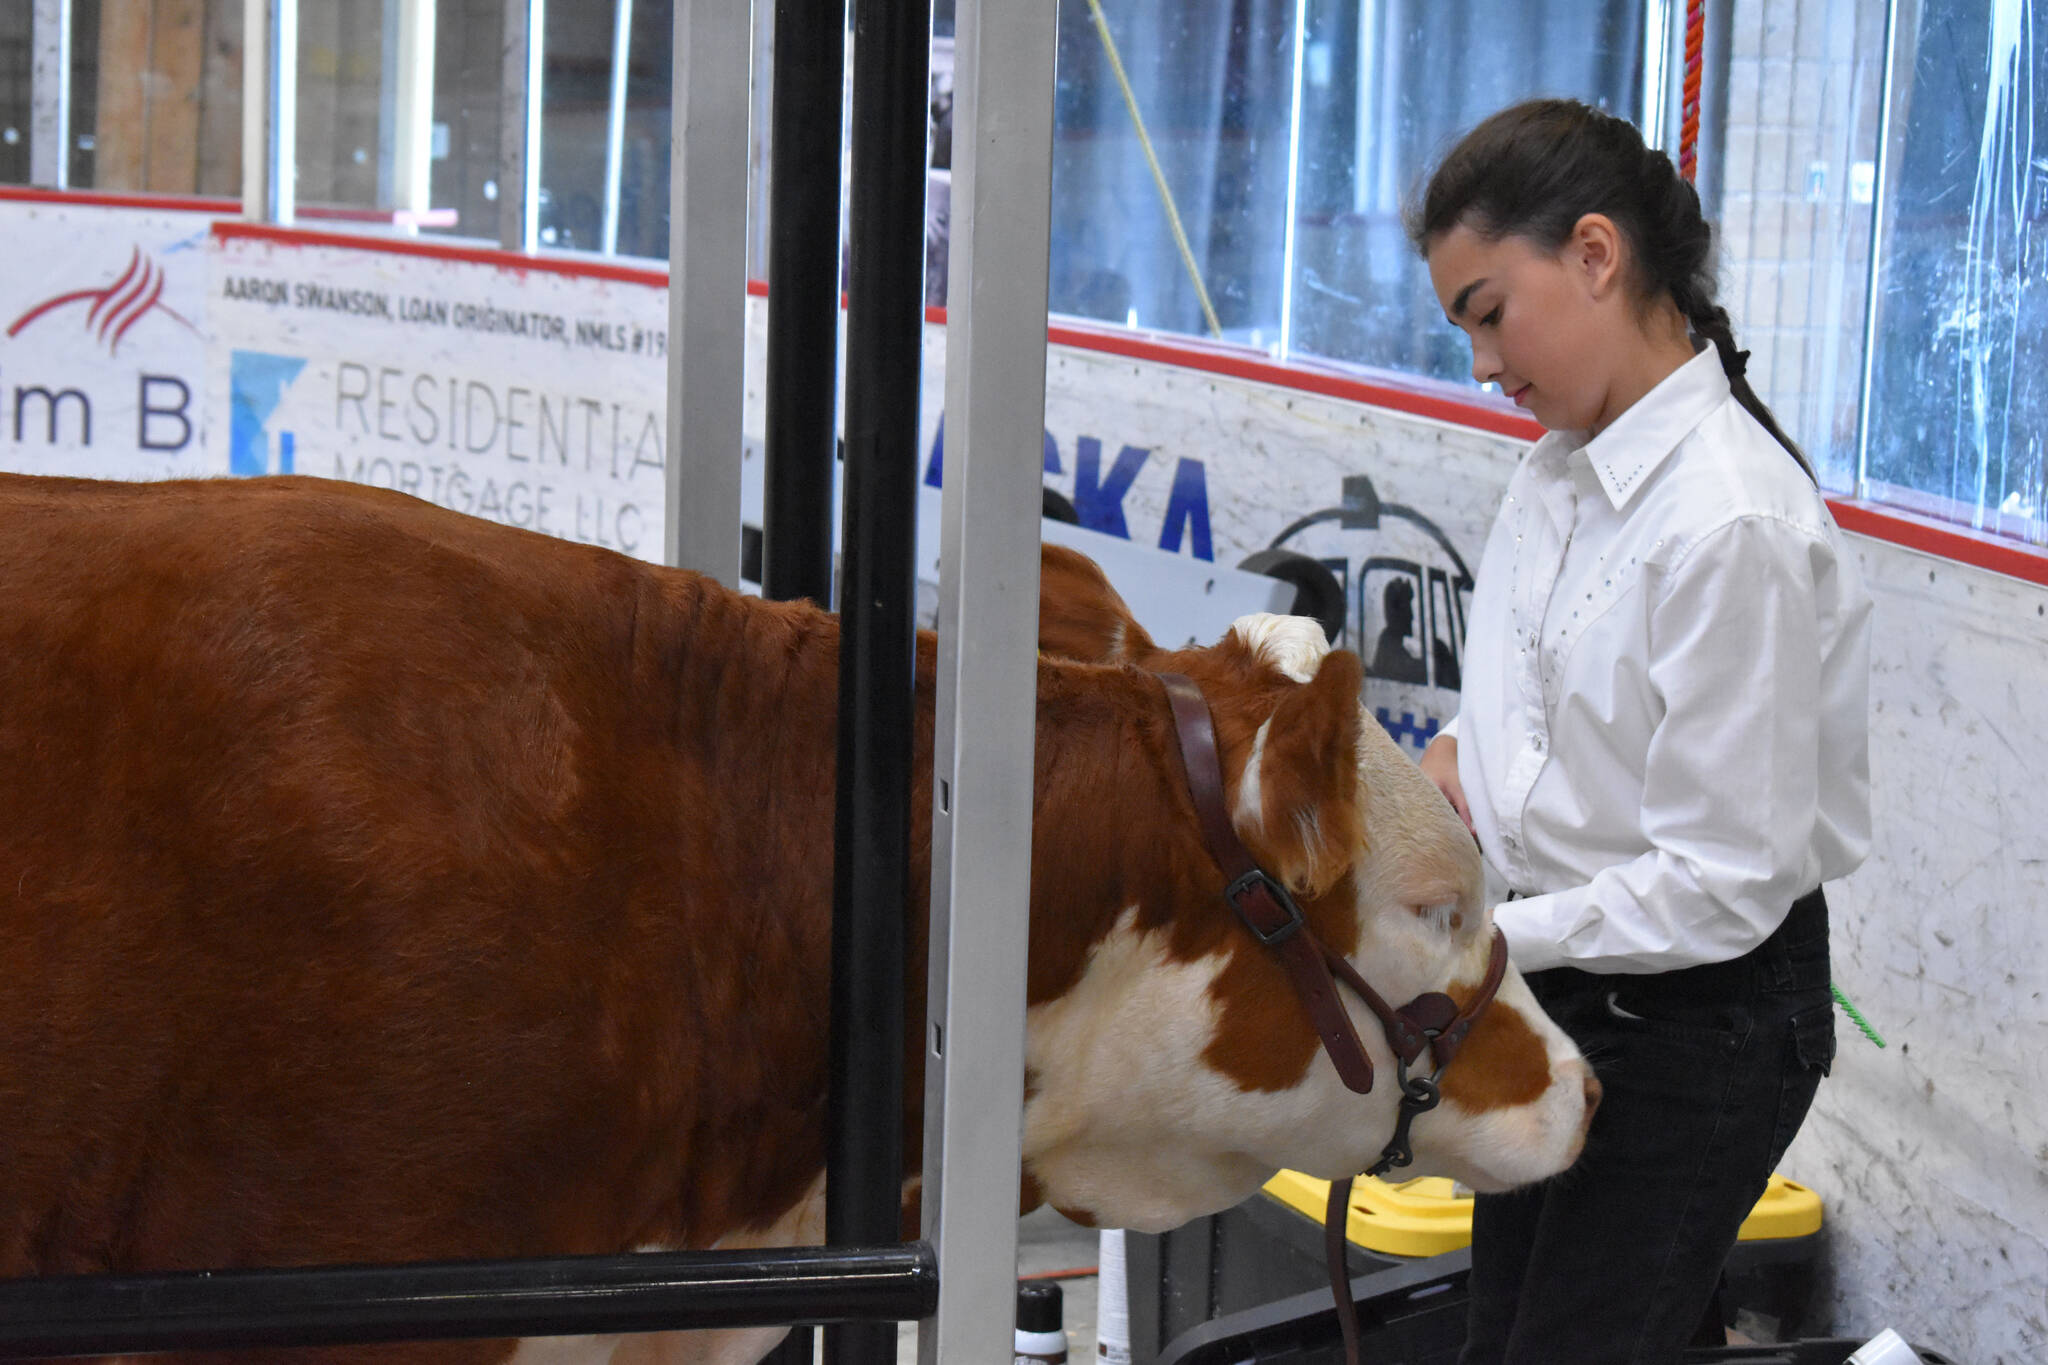 Rayna Reynolds tends to her cow at the 4-H Agriculture Expo in Soldotna, Alaska on Aug. 5, 2022. (Jake Dye/Peninsula Clarion)